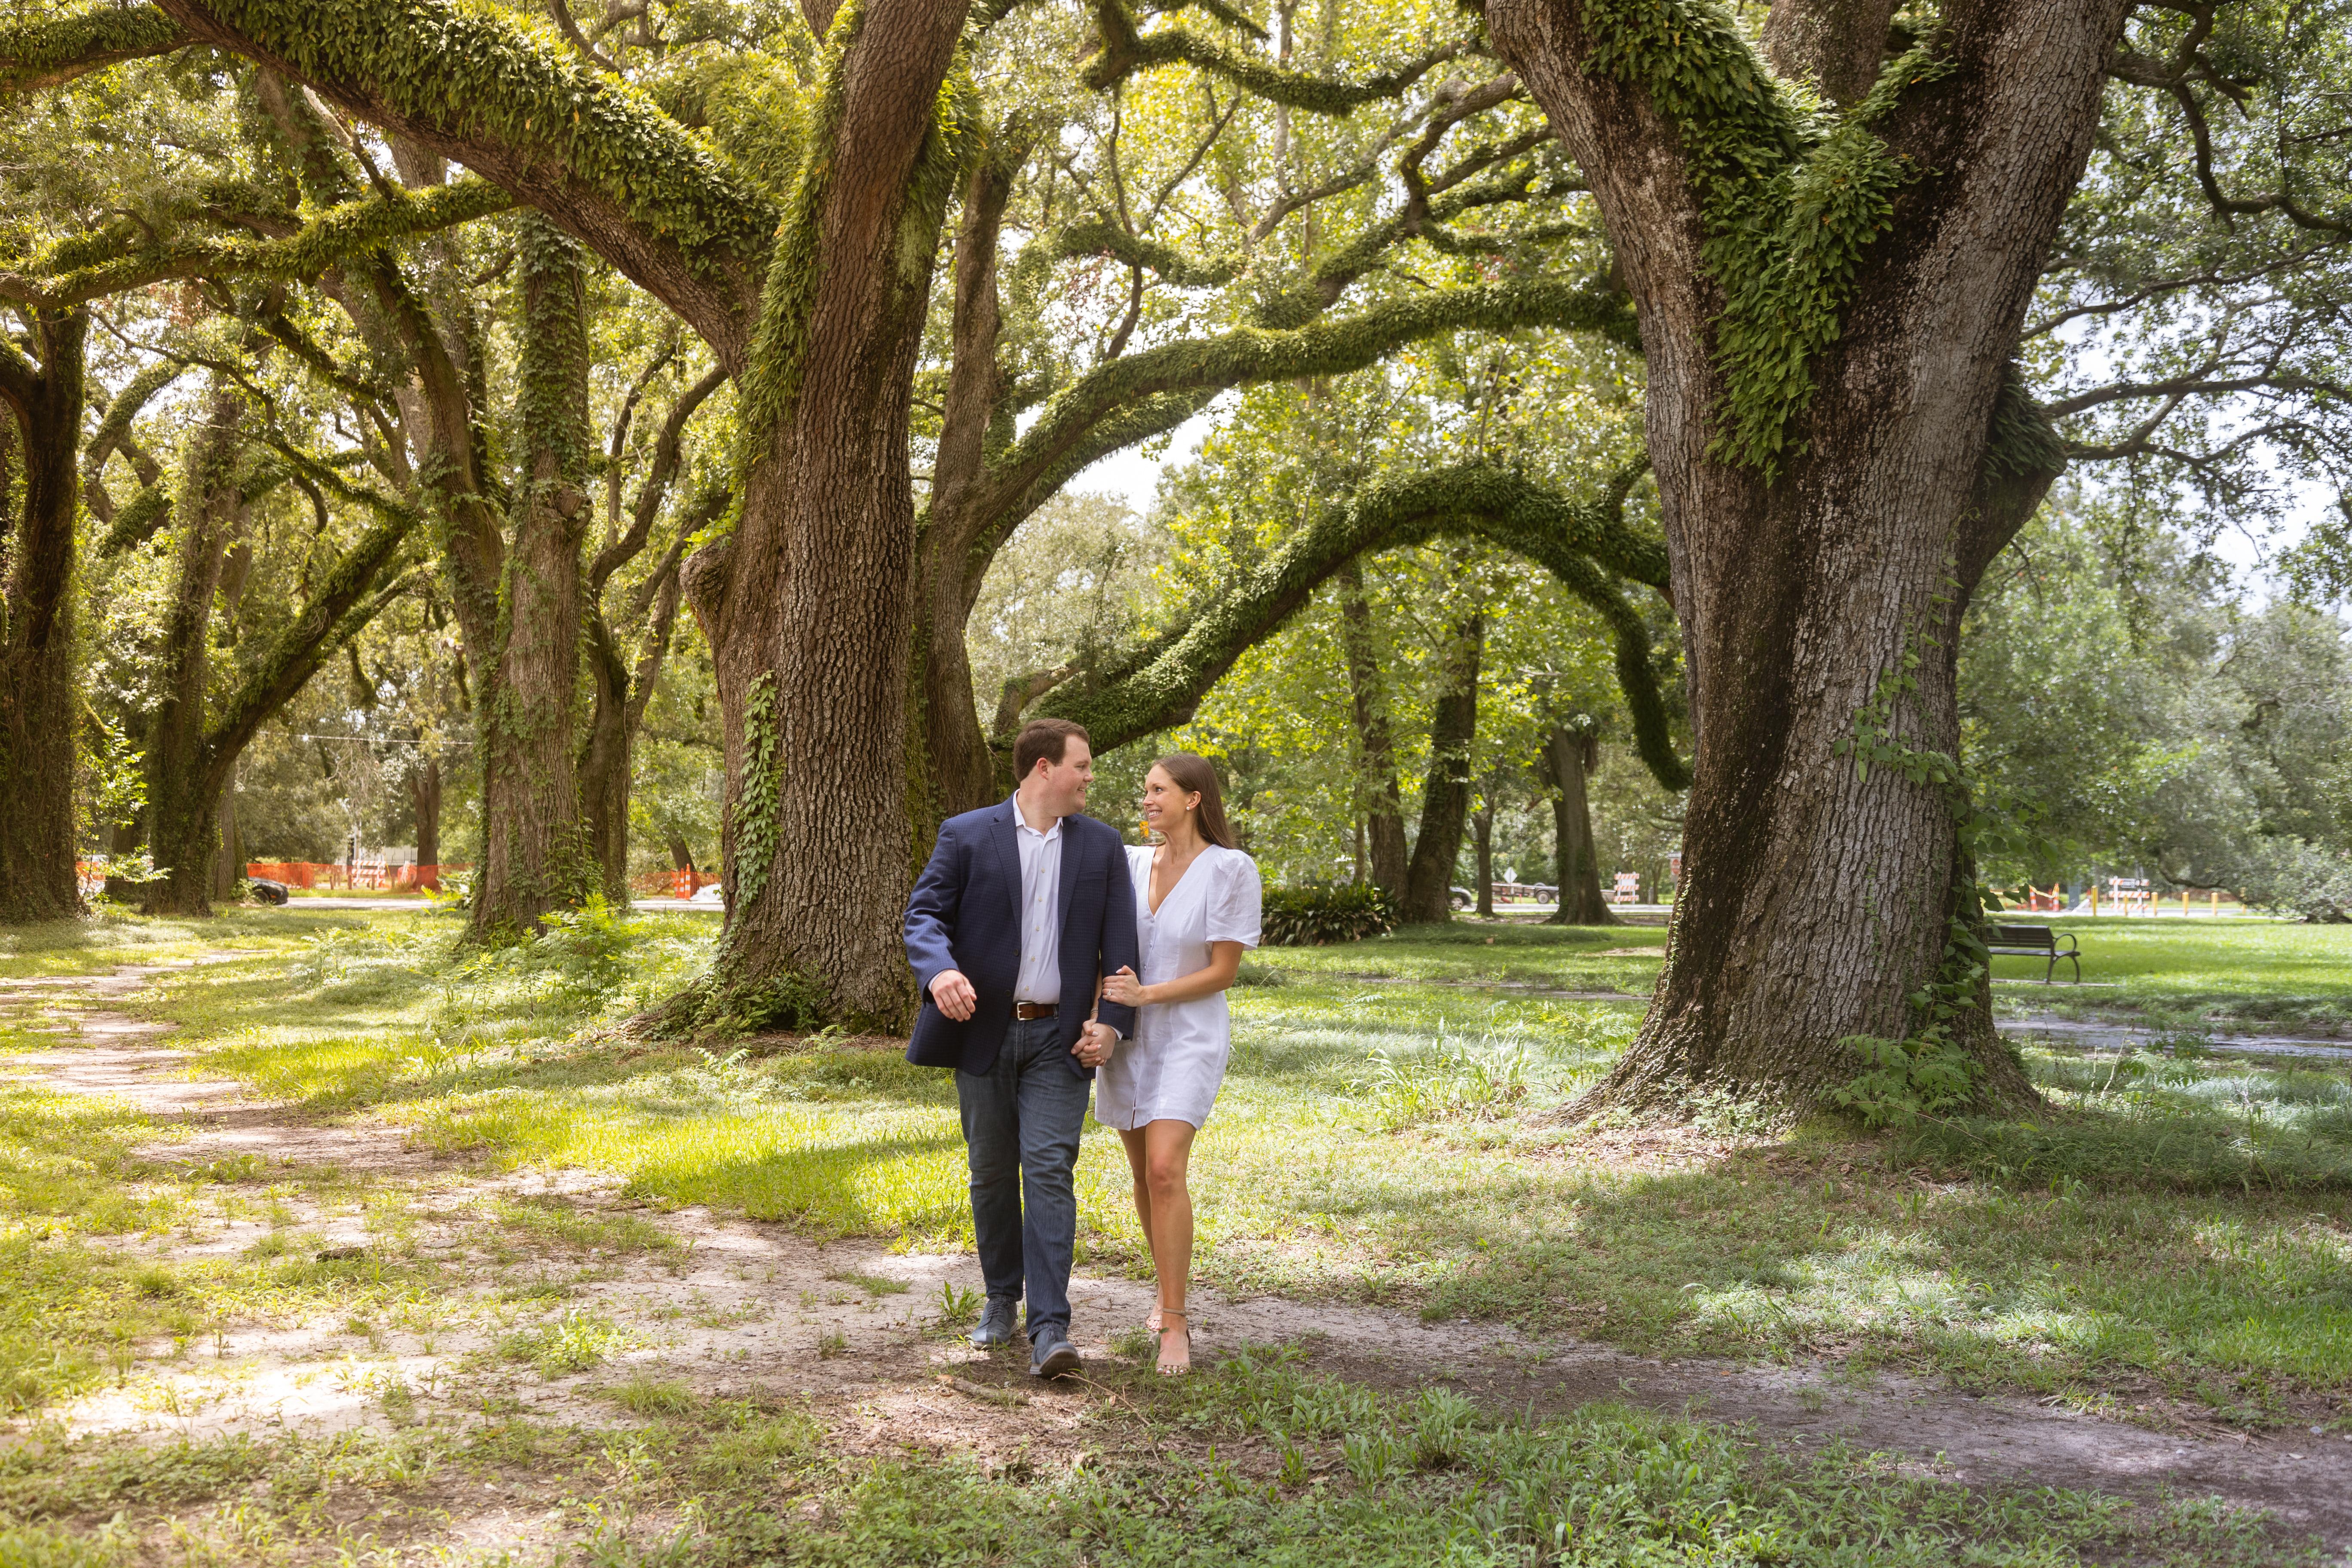 The Wedding Website of Hailey Becker and William Barns